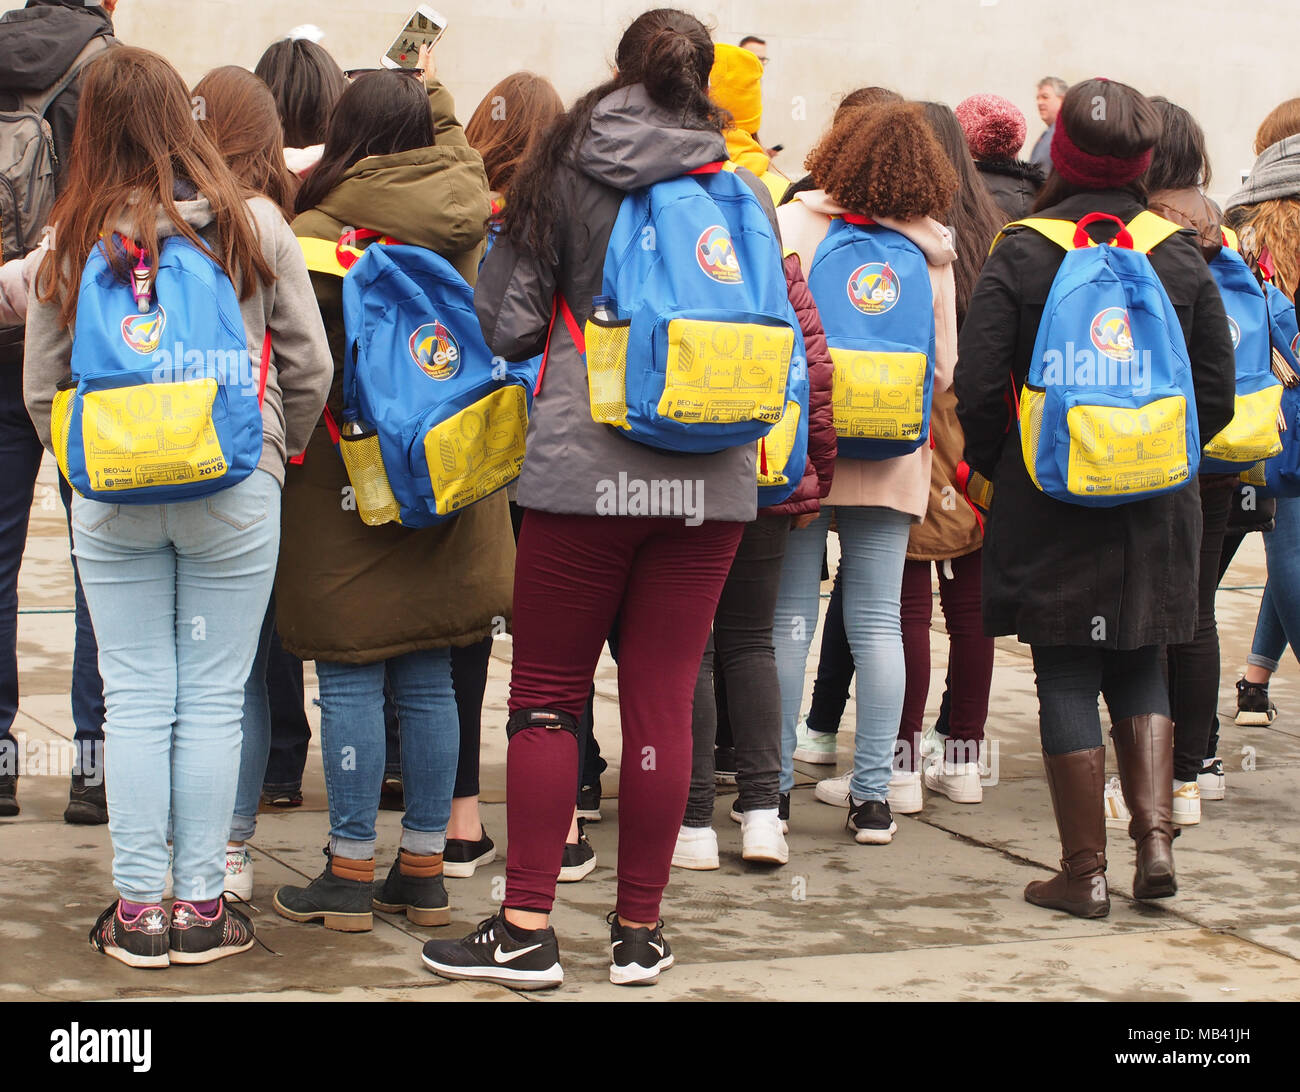 A view of the backs of a group of students visiting London in Trafalgar Square watching one of the entertainers, all carrying identical backpacks Stock Photo